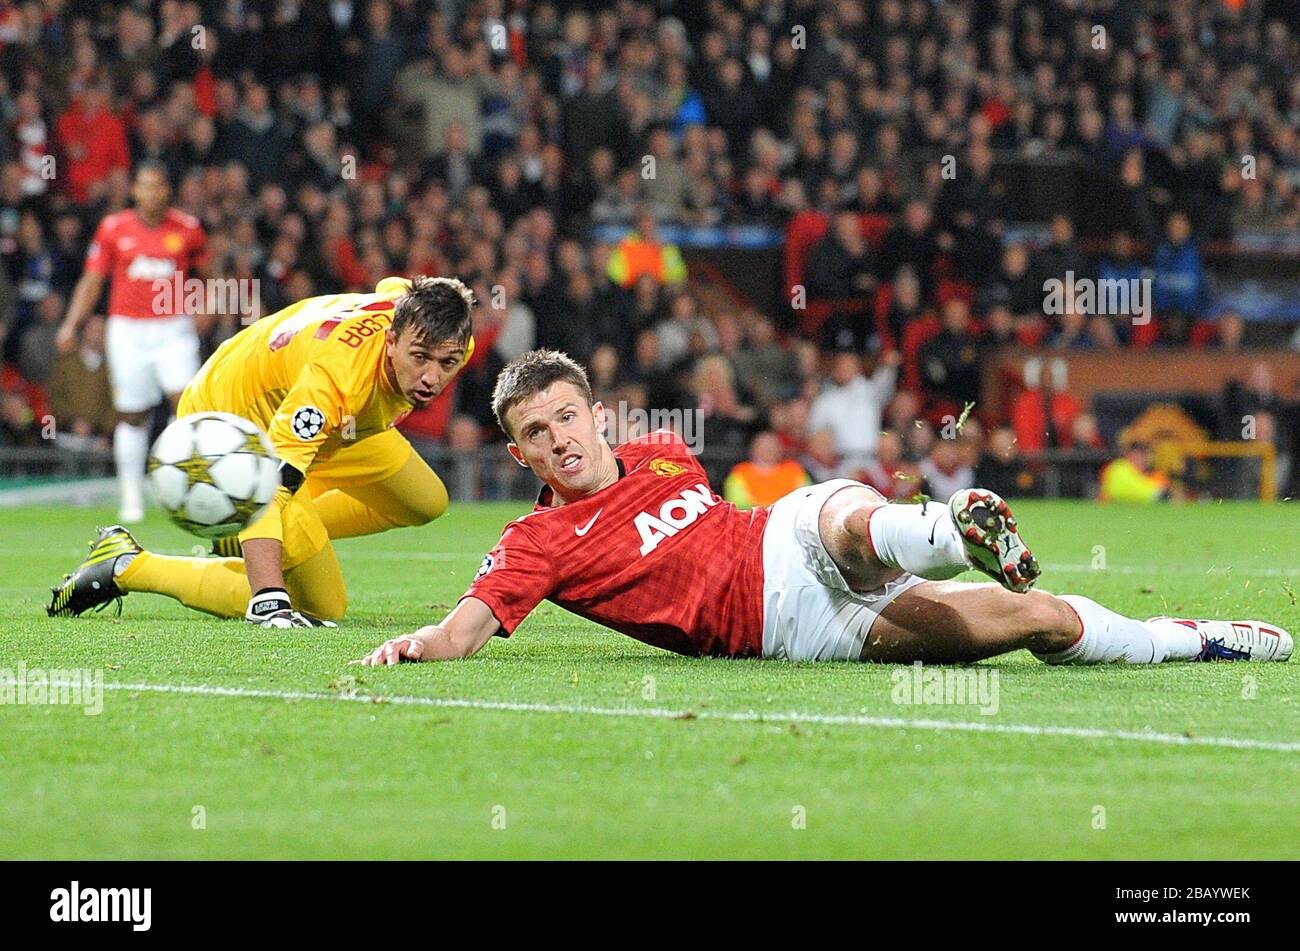 Manchester United's Michael Carrick goes round Galatasary goalkeeper Nestor Fernando Muslera and scores their first goal of the game Stock Photo